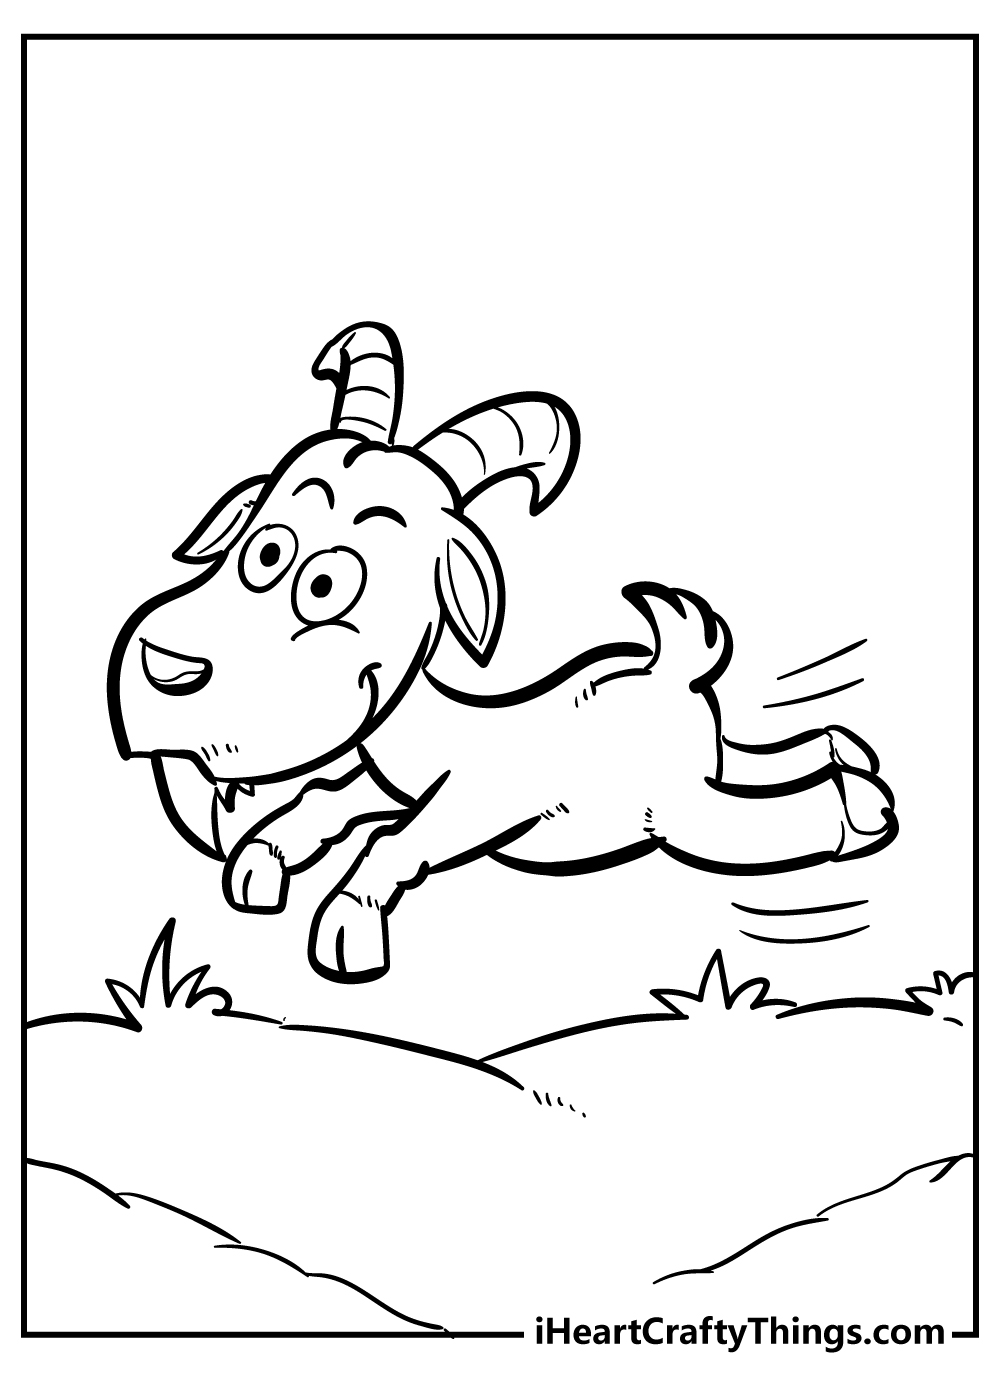 Goat Coloring Book for adults free download